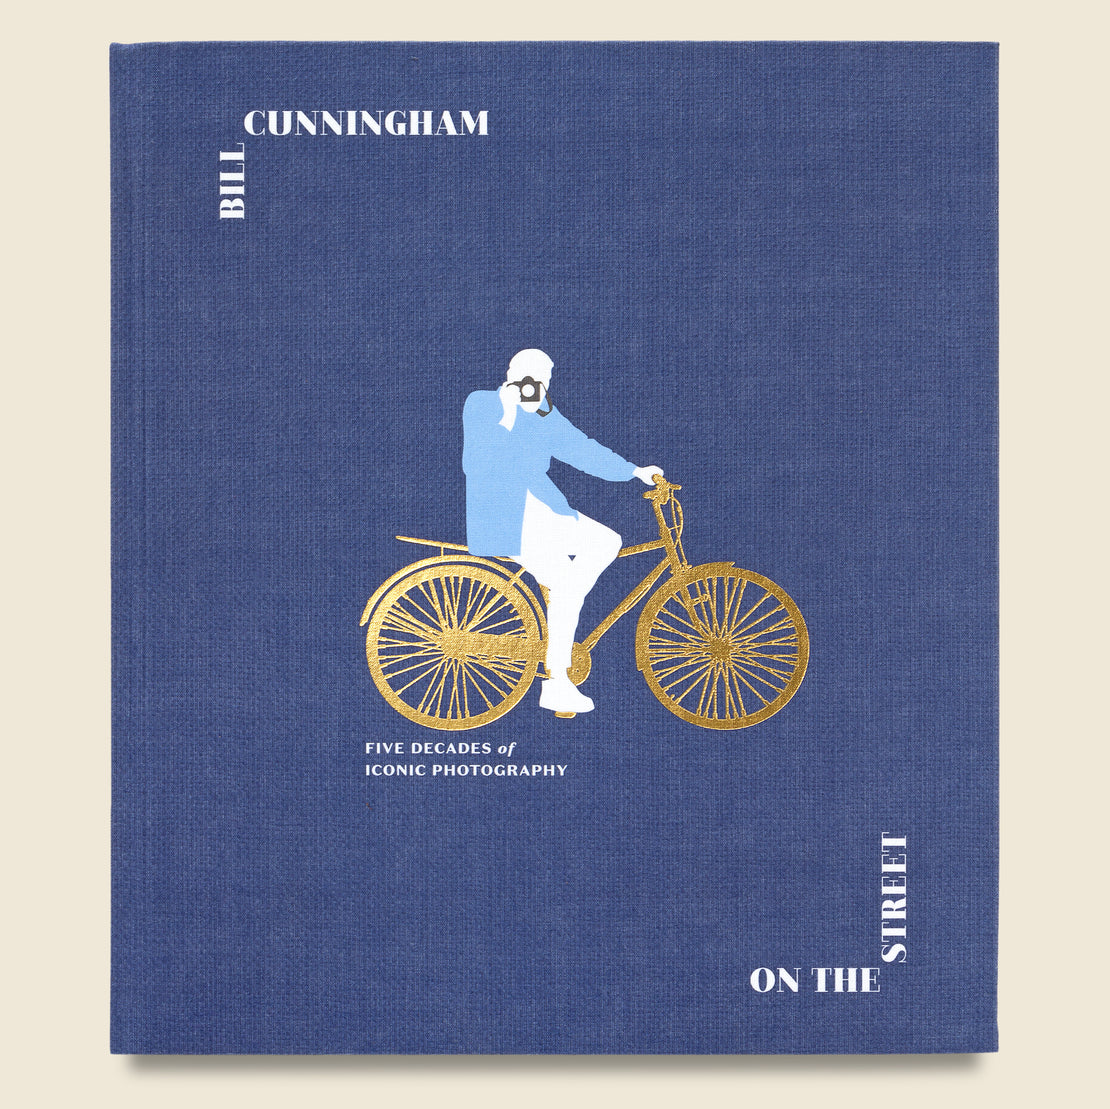 Bookstore Bill Cunningham: On the Street: Five Decades of Iconic Photography